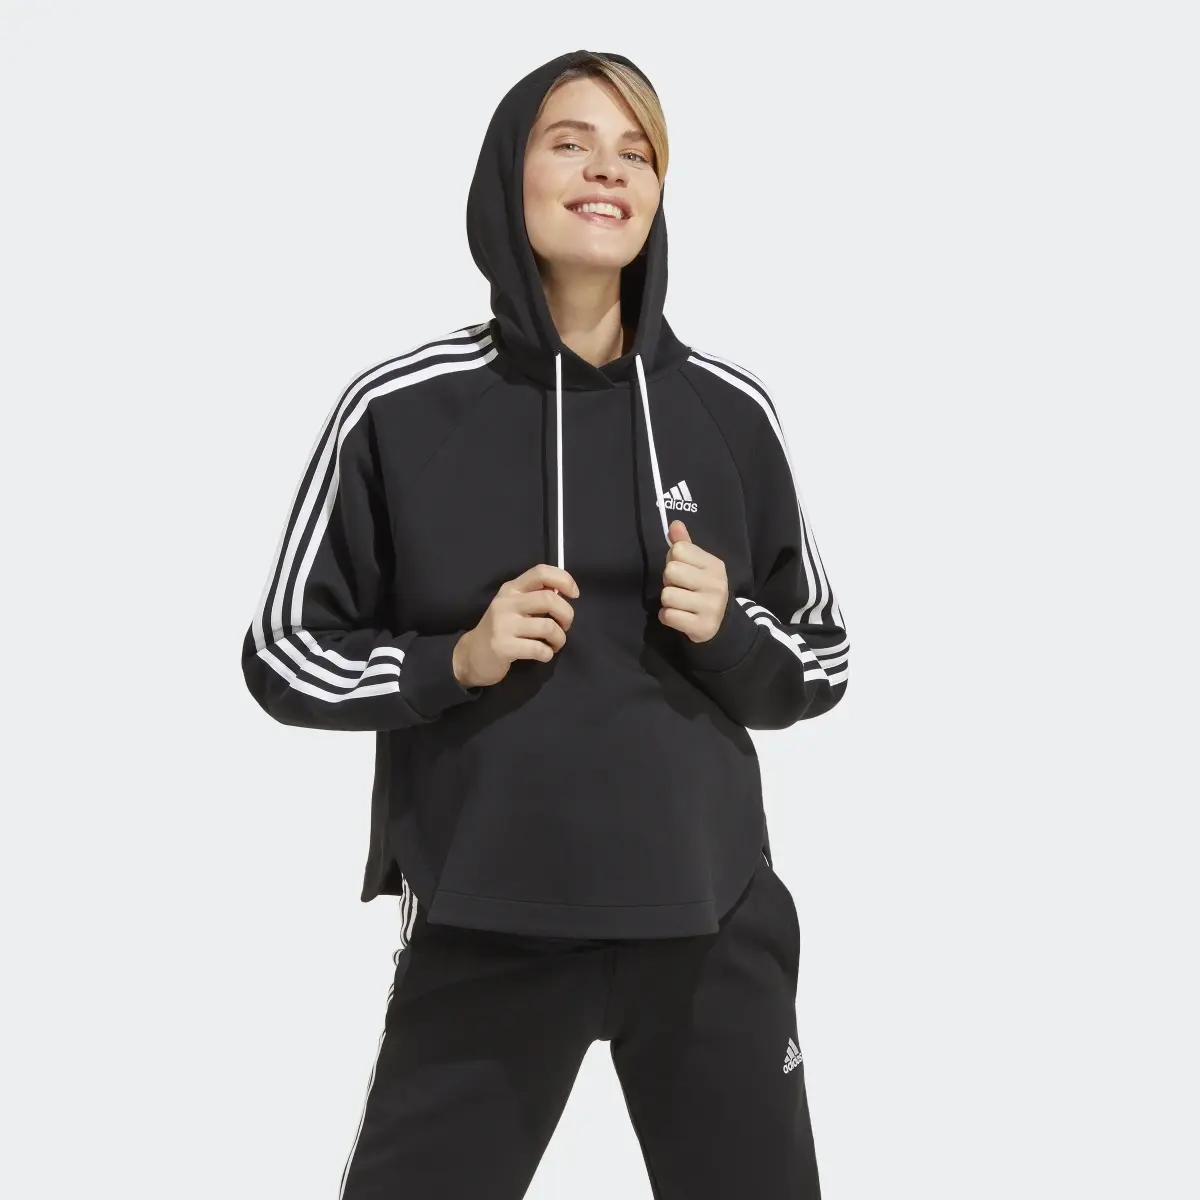 Adidas Maternity Over-the-Head Hoodie. 2